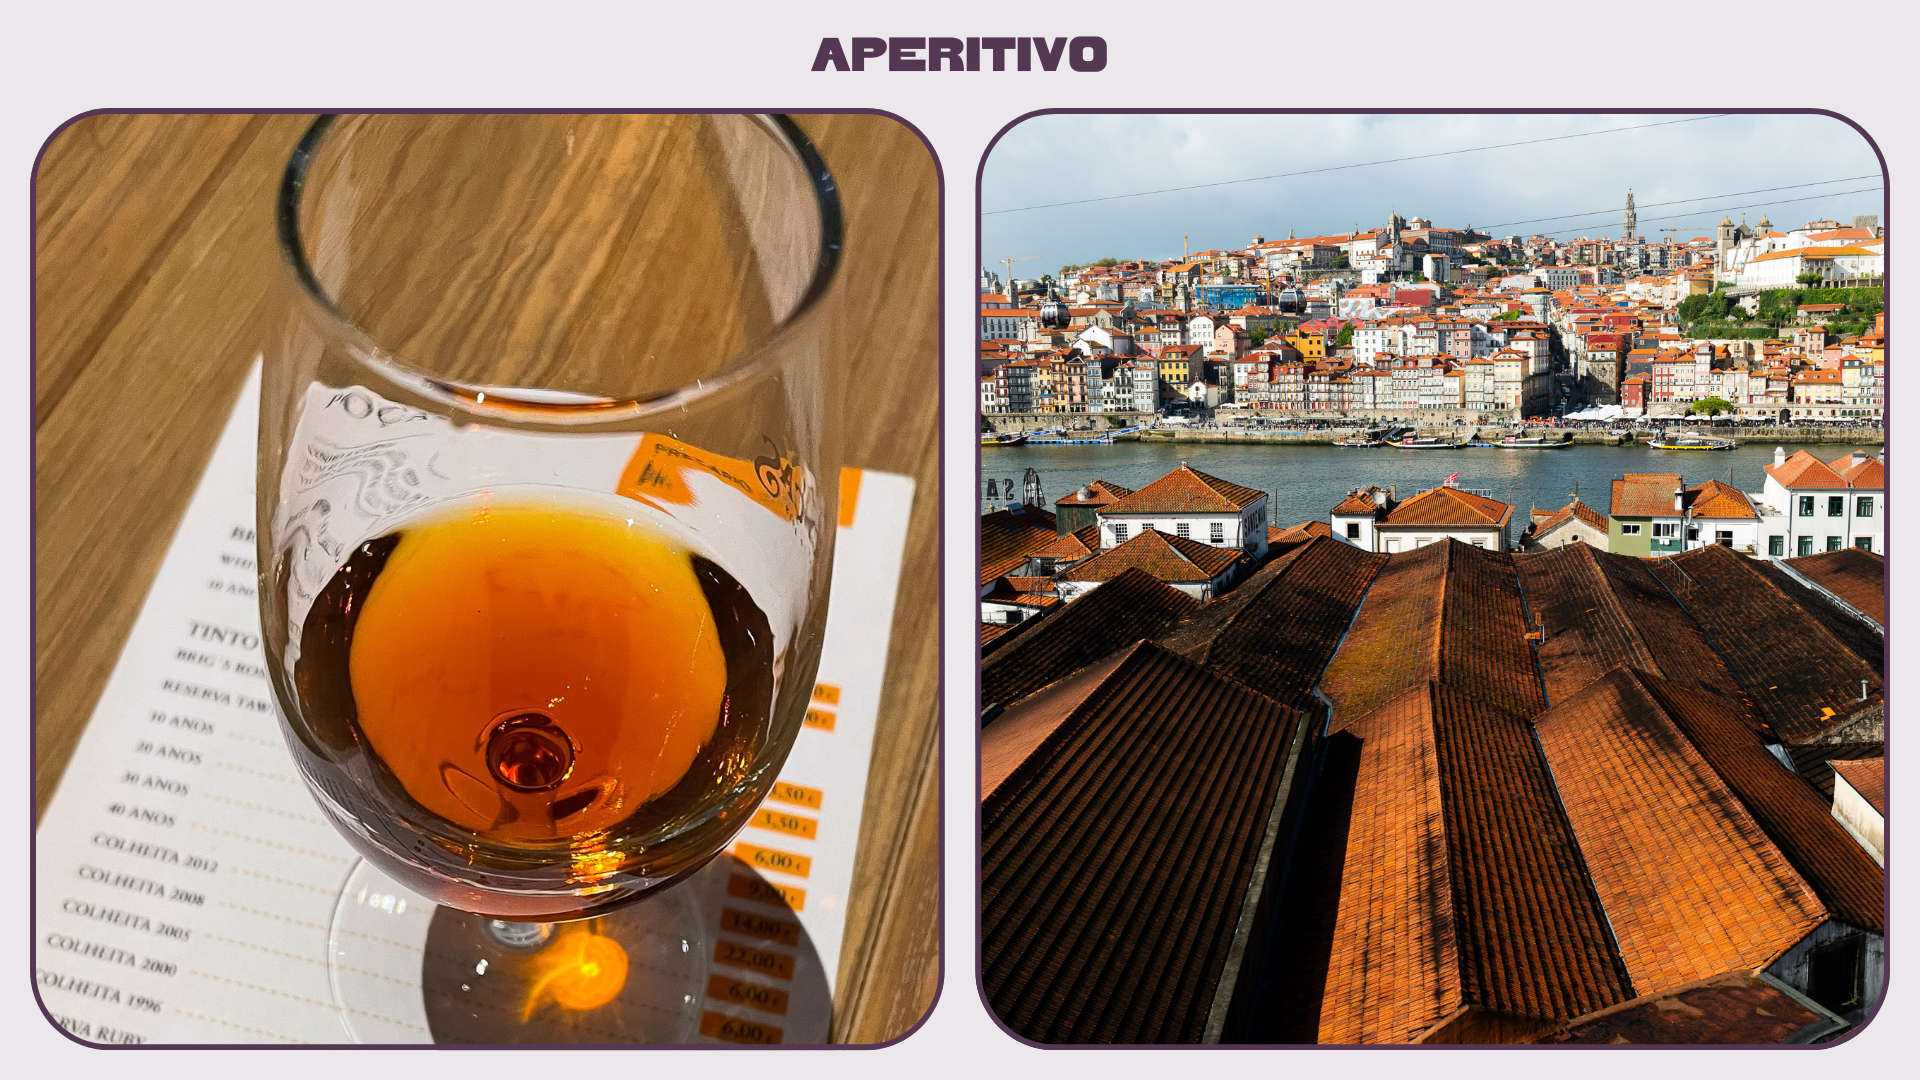 L: Up-close shot of glass of wine. R: View of Porto's rooftops from wine bar